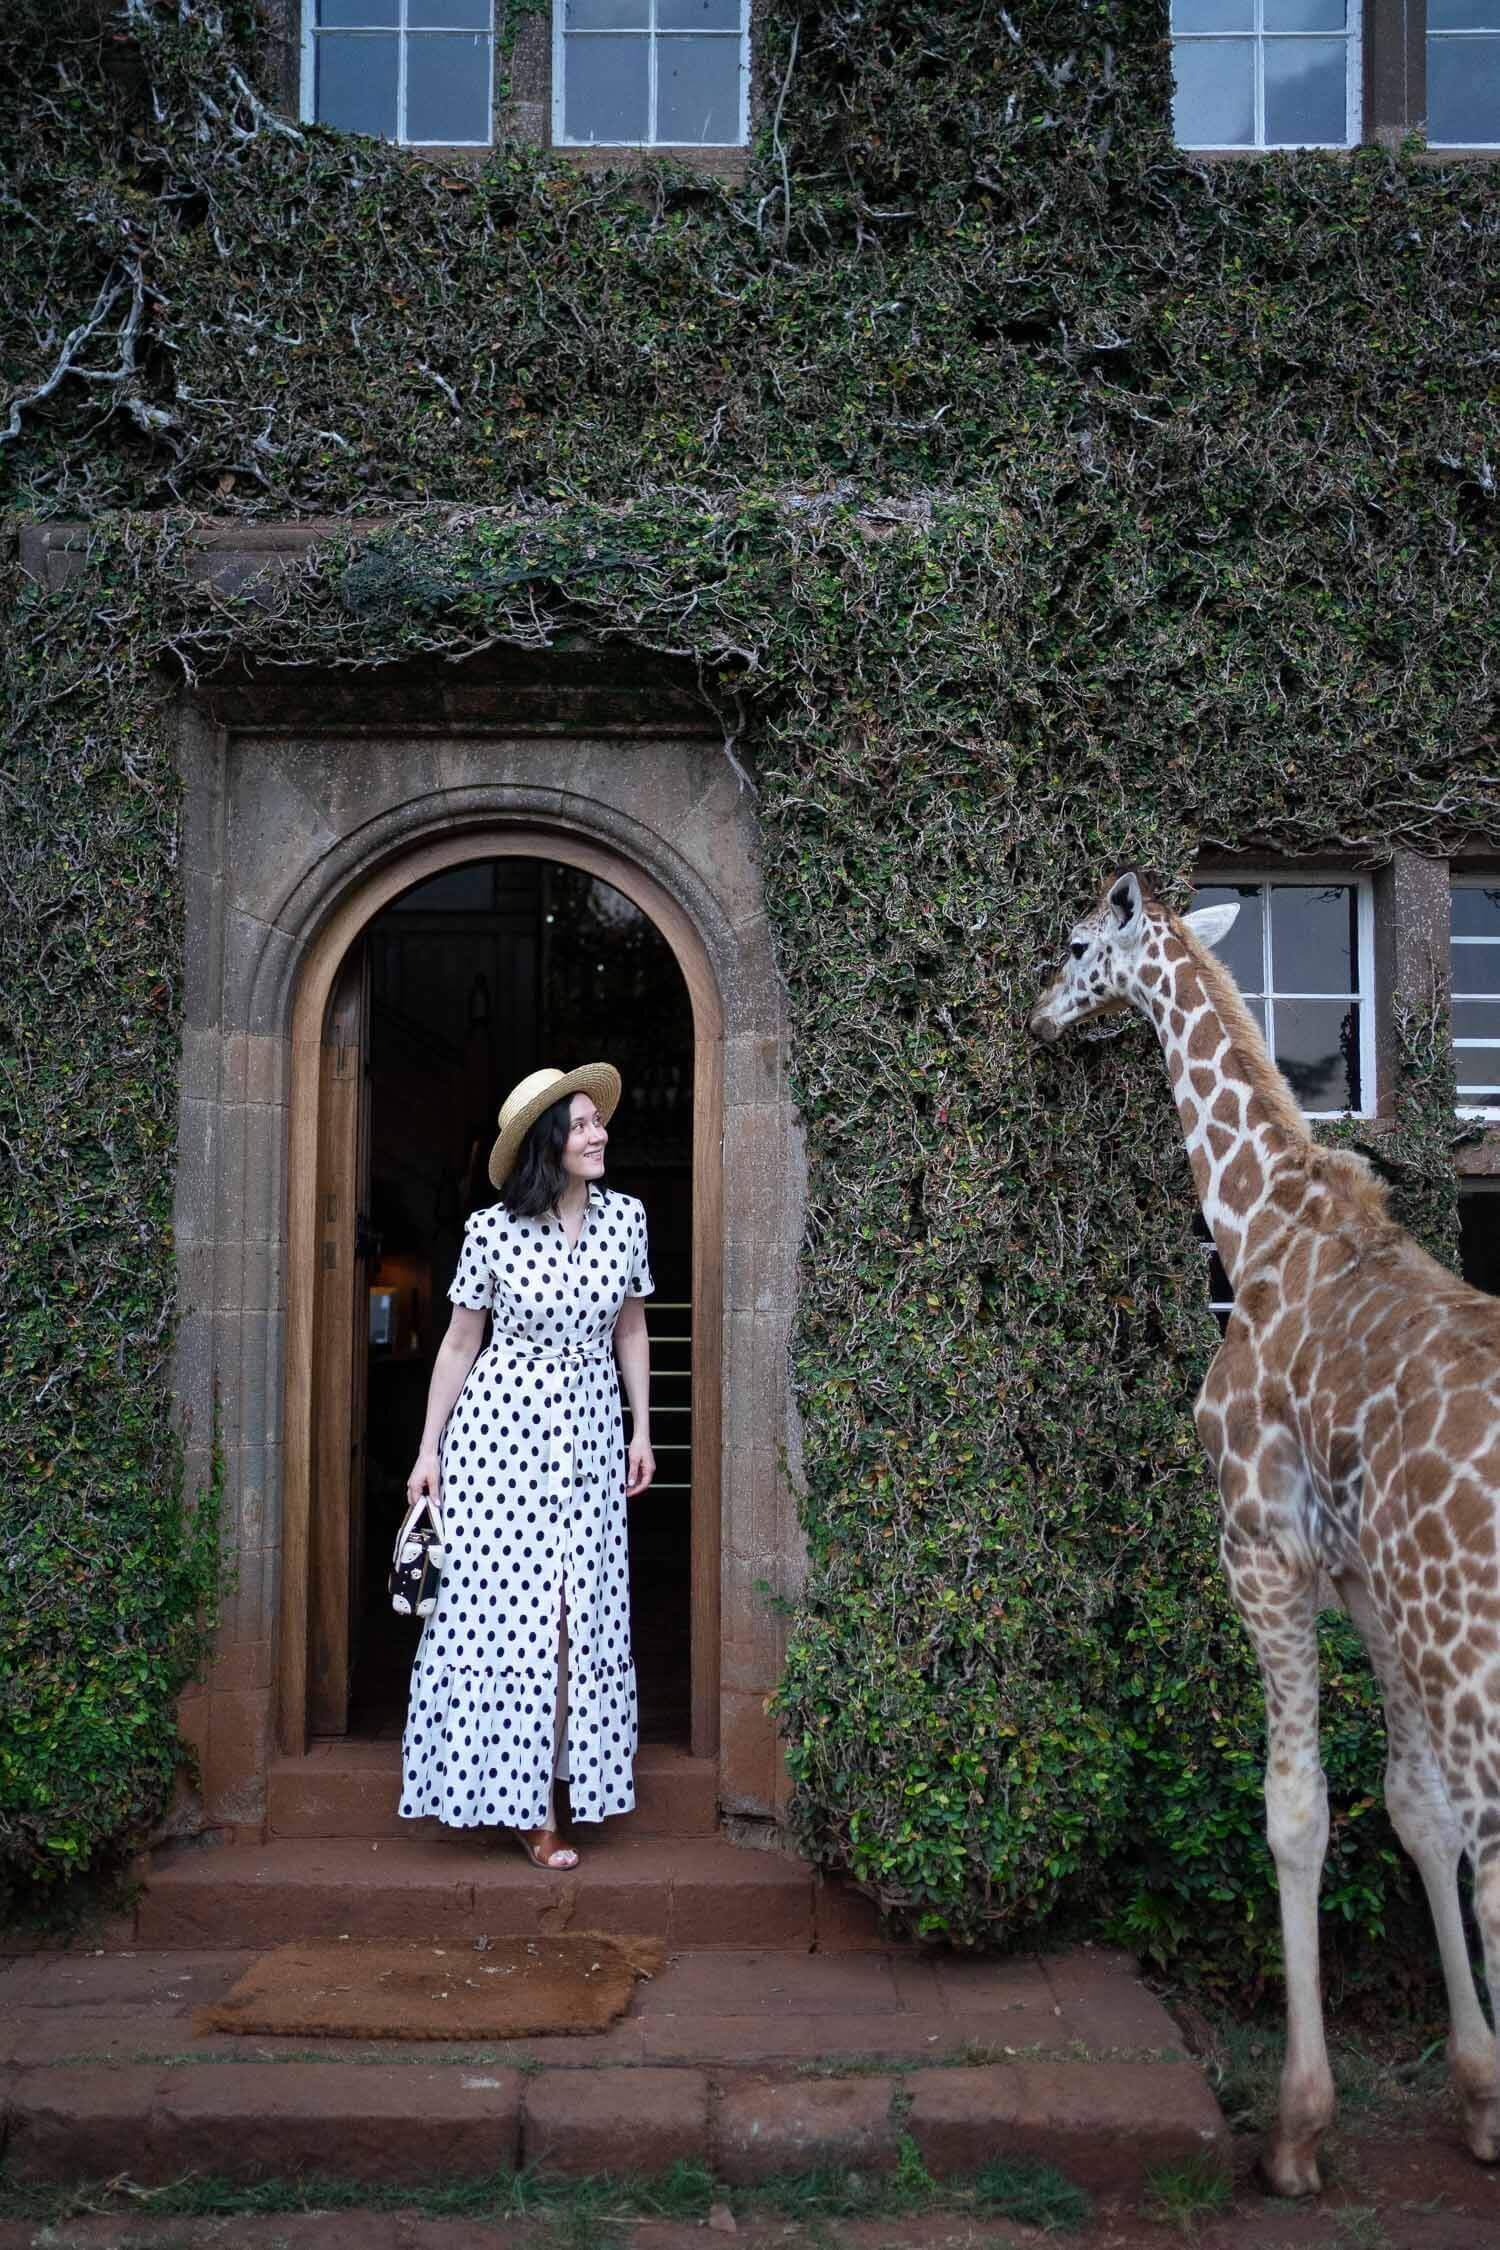 What it’s Actually Like to Stay at Giraffe Manor